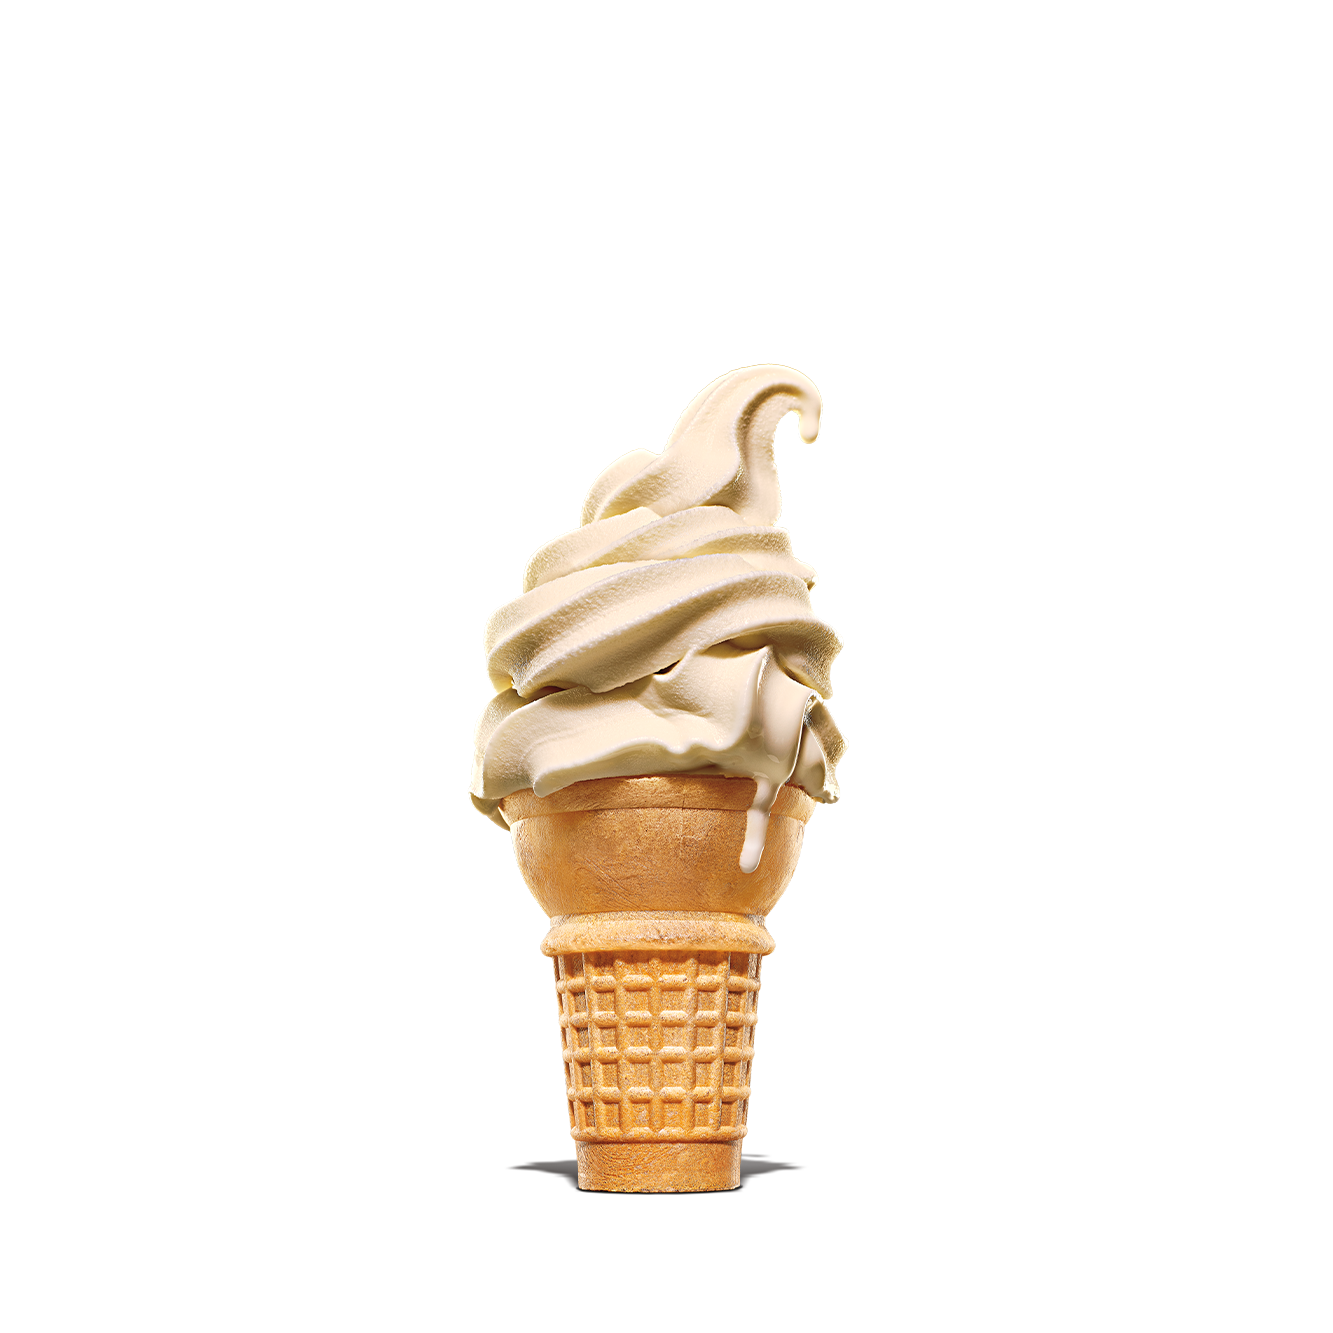 Calories in Burger King Soft Serve Cone